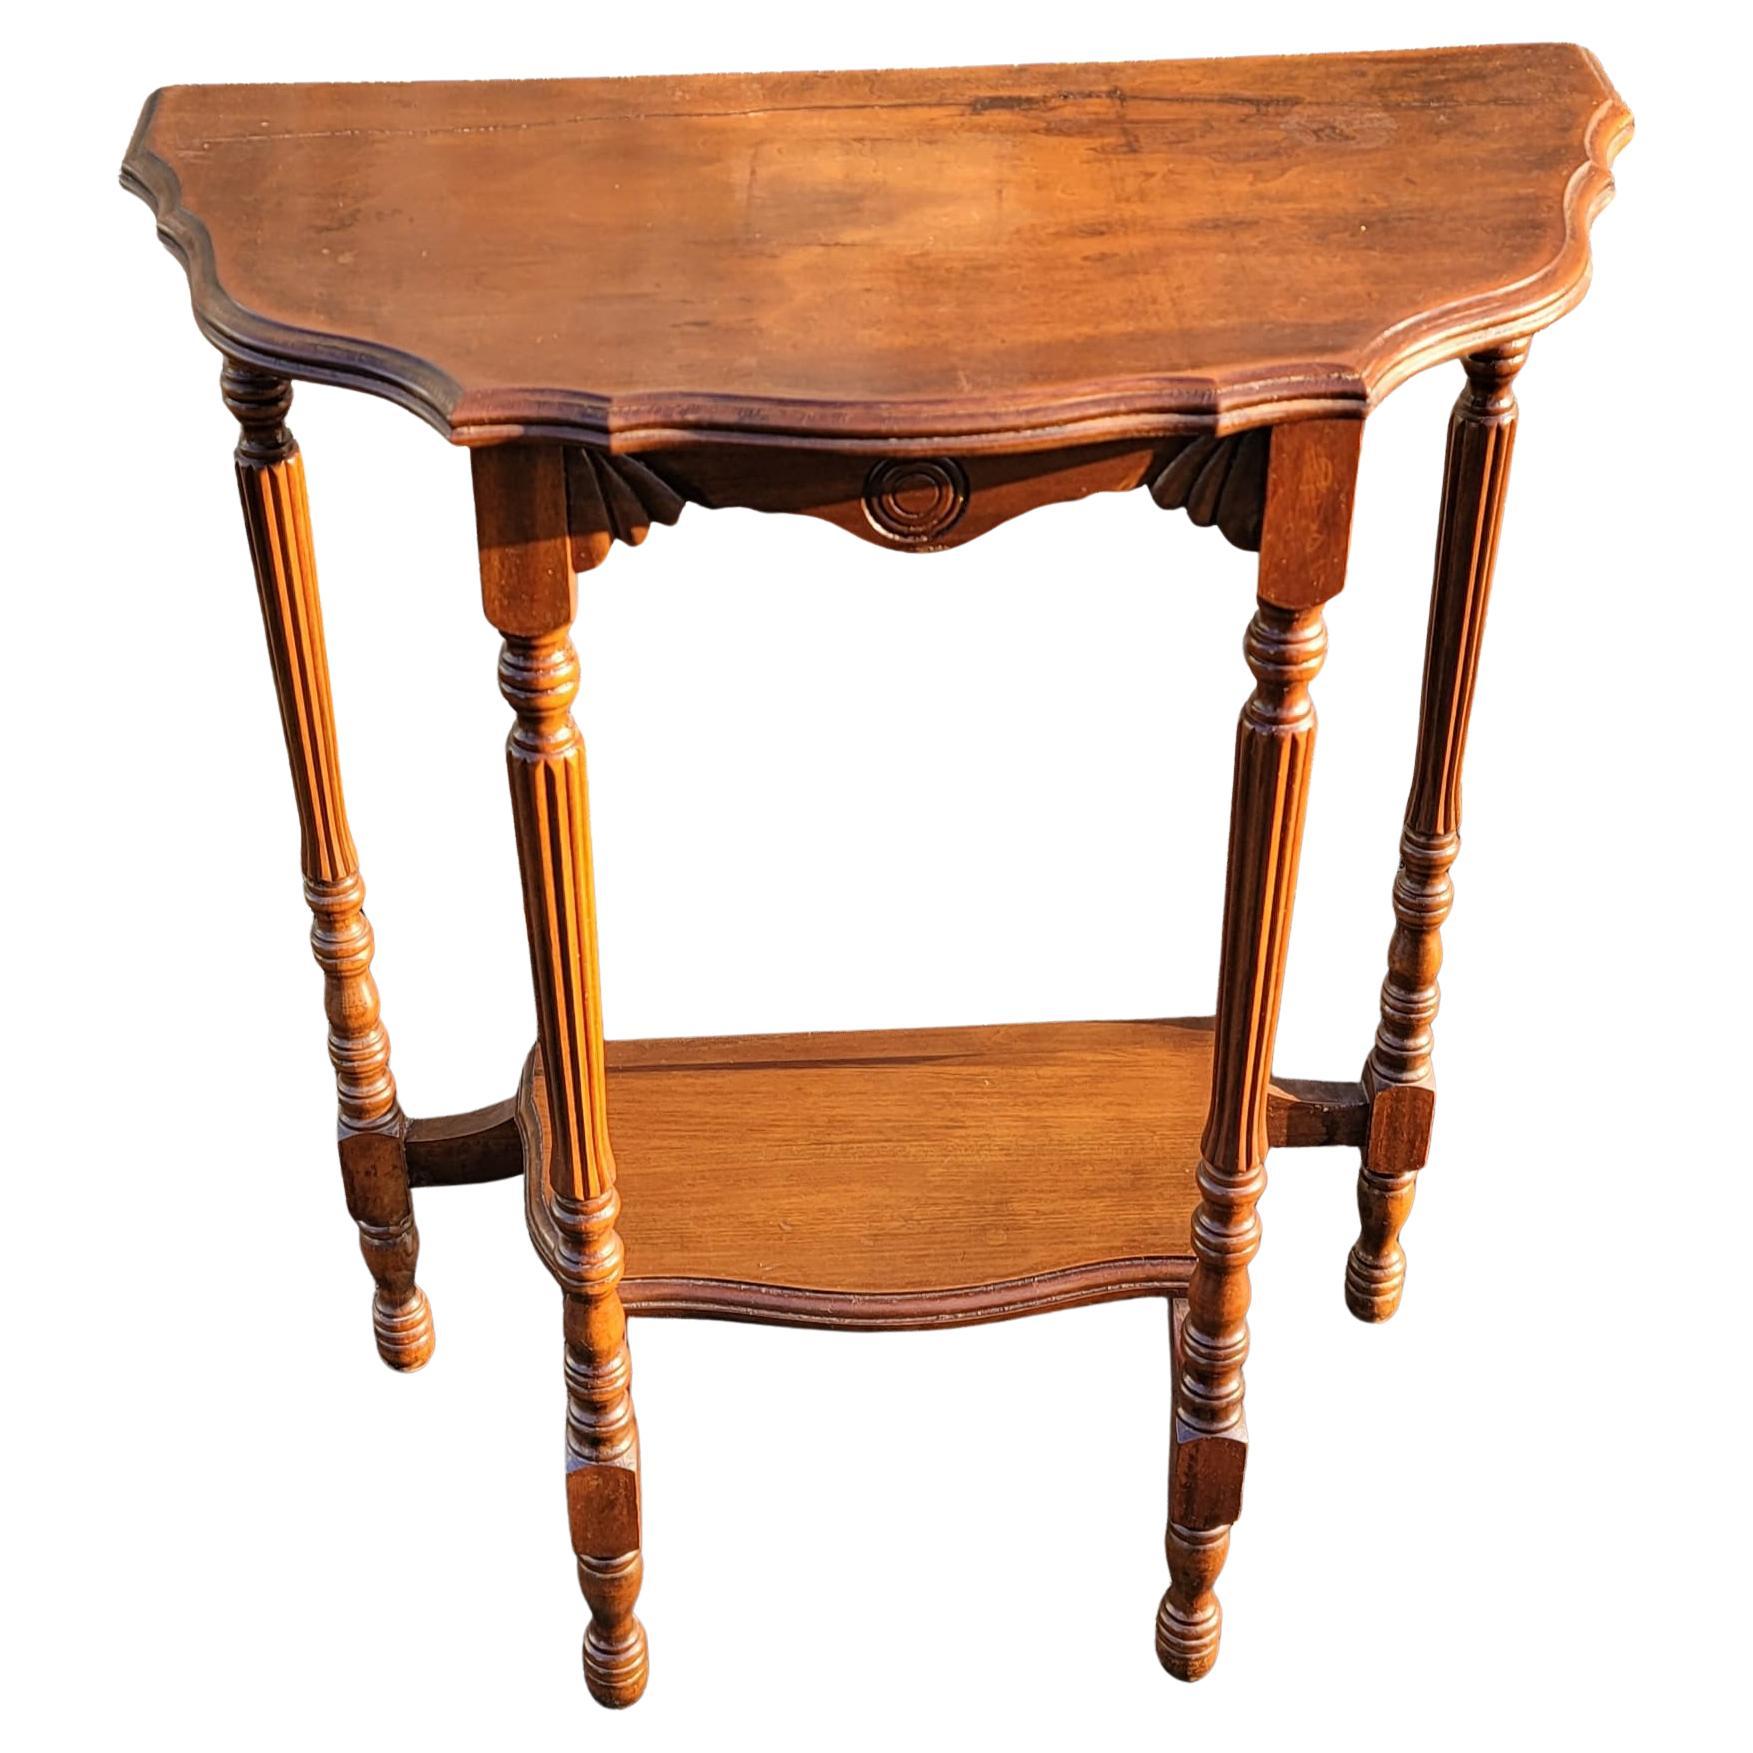 An Early America Two-Tier solid Cherry console table with Scalloped Edge top, turned legs with cannelure sections, Circa 1940s. Features a Lower tier shelf with an 18